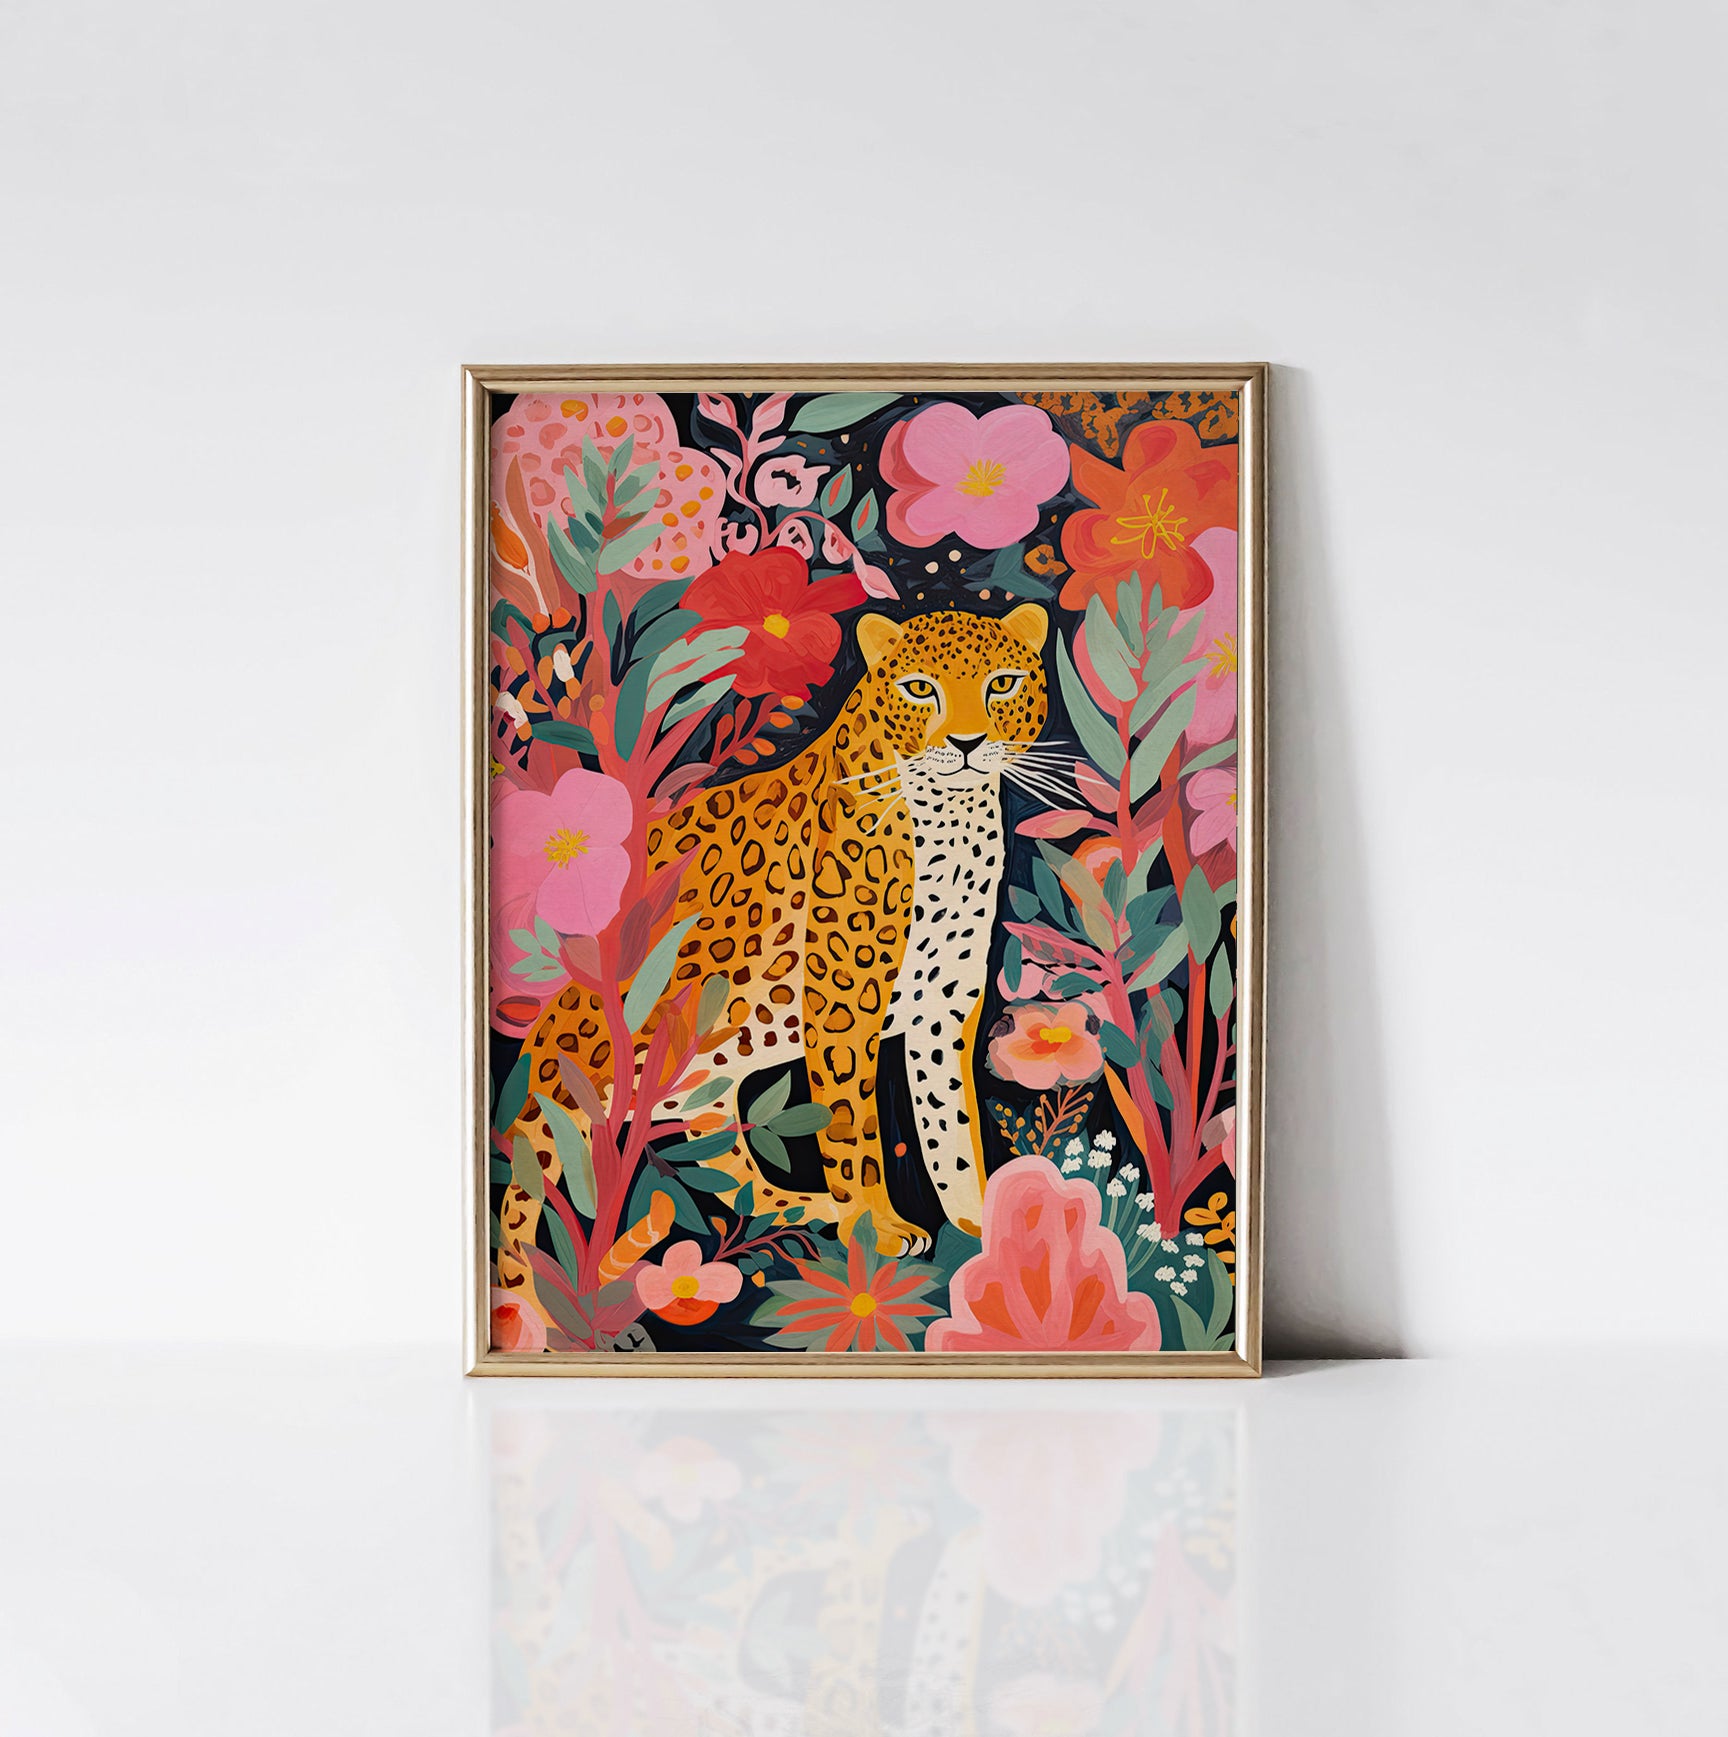 Vibrant Floral Leopard Serenity art print displayed in a sleek gold frame, featuring a majestic leopard nestled among lush tropical foliage in pink, green, and orange tones